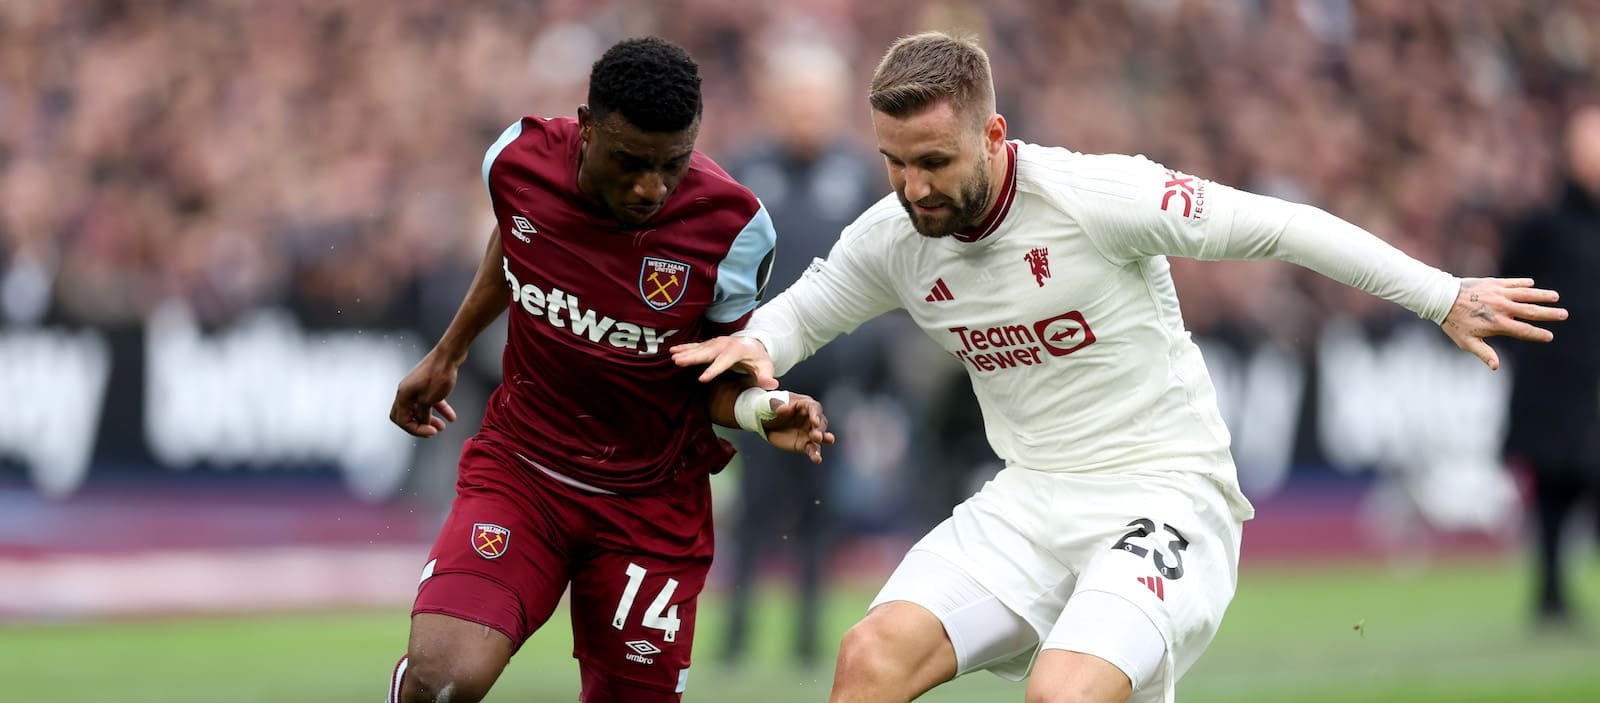 “Just not good enough”: Luke Shaw opens up on Man United’s 2-0 defeat vs. West Ham United – Man United News And Transfer News